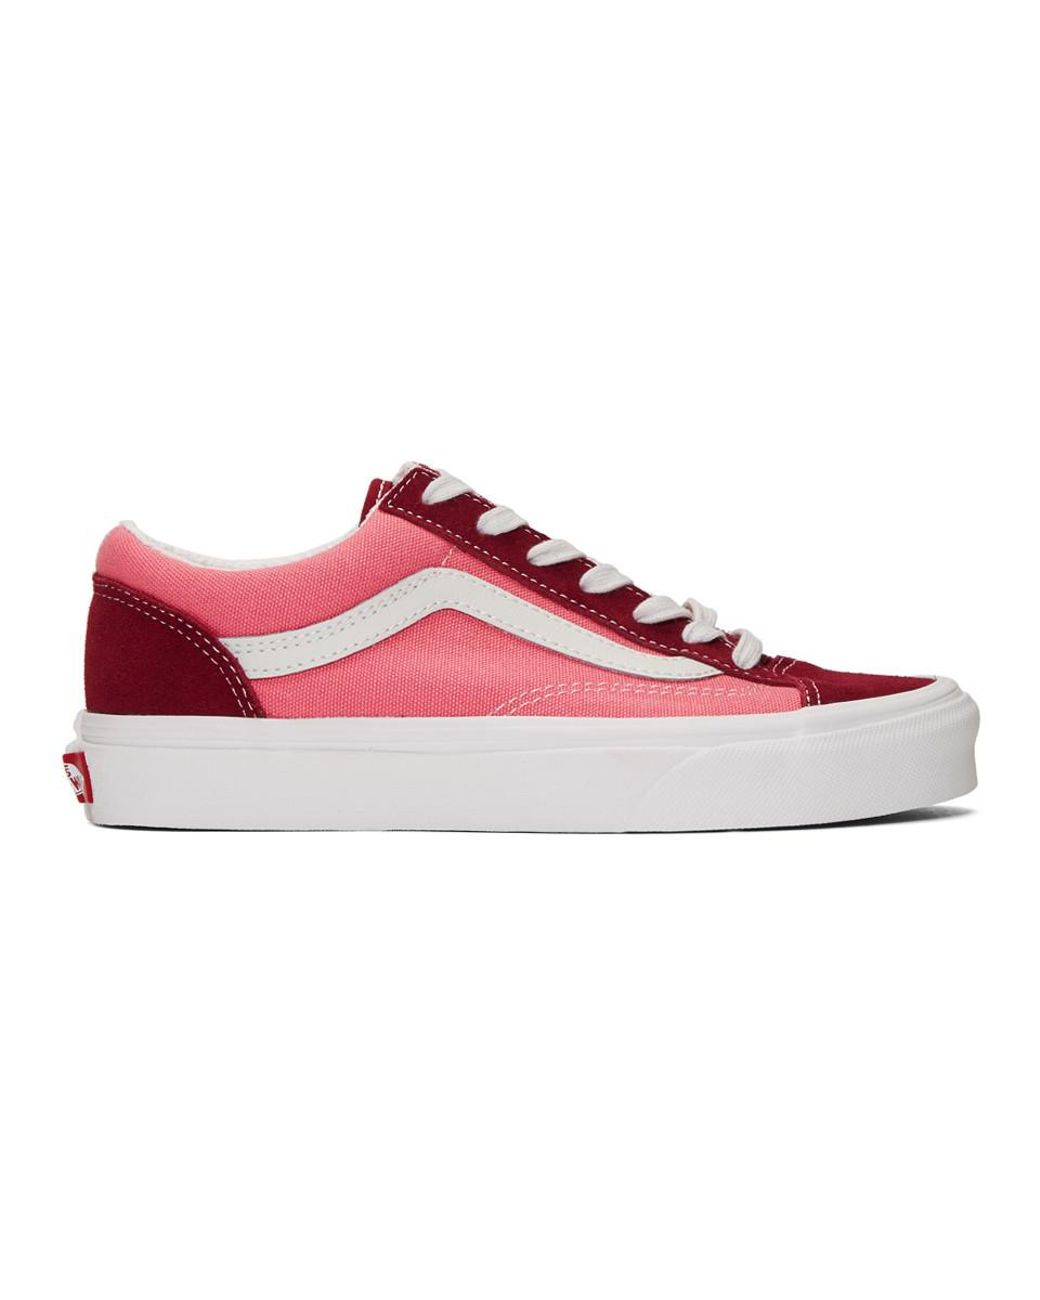 Red authentic vans | Red vans shoes, Red vans outfit, Vans authentic outfit